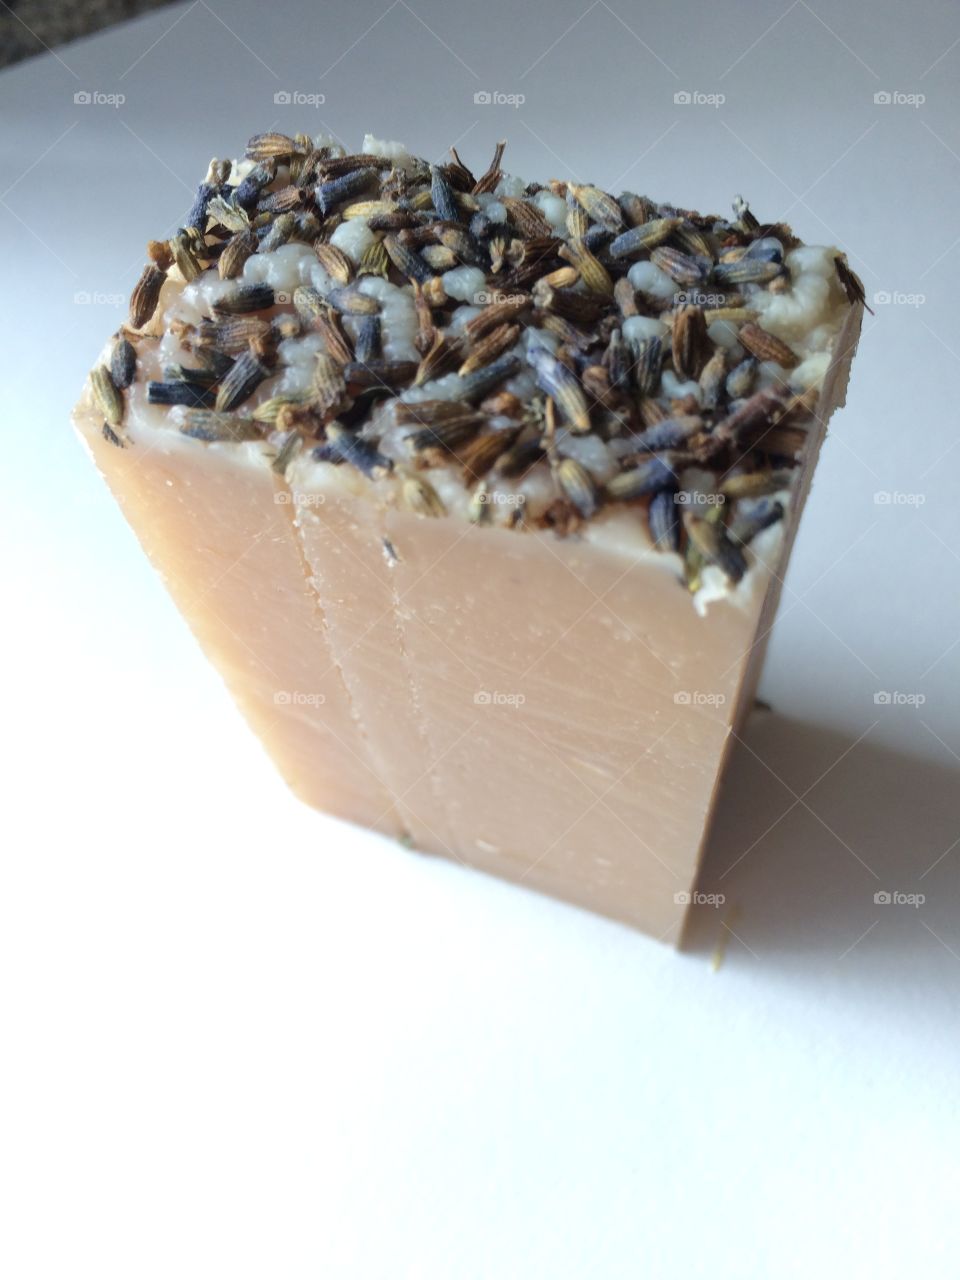 Lavender soap. I am a soap maker. These are some of my batches of soap